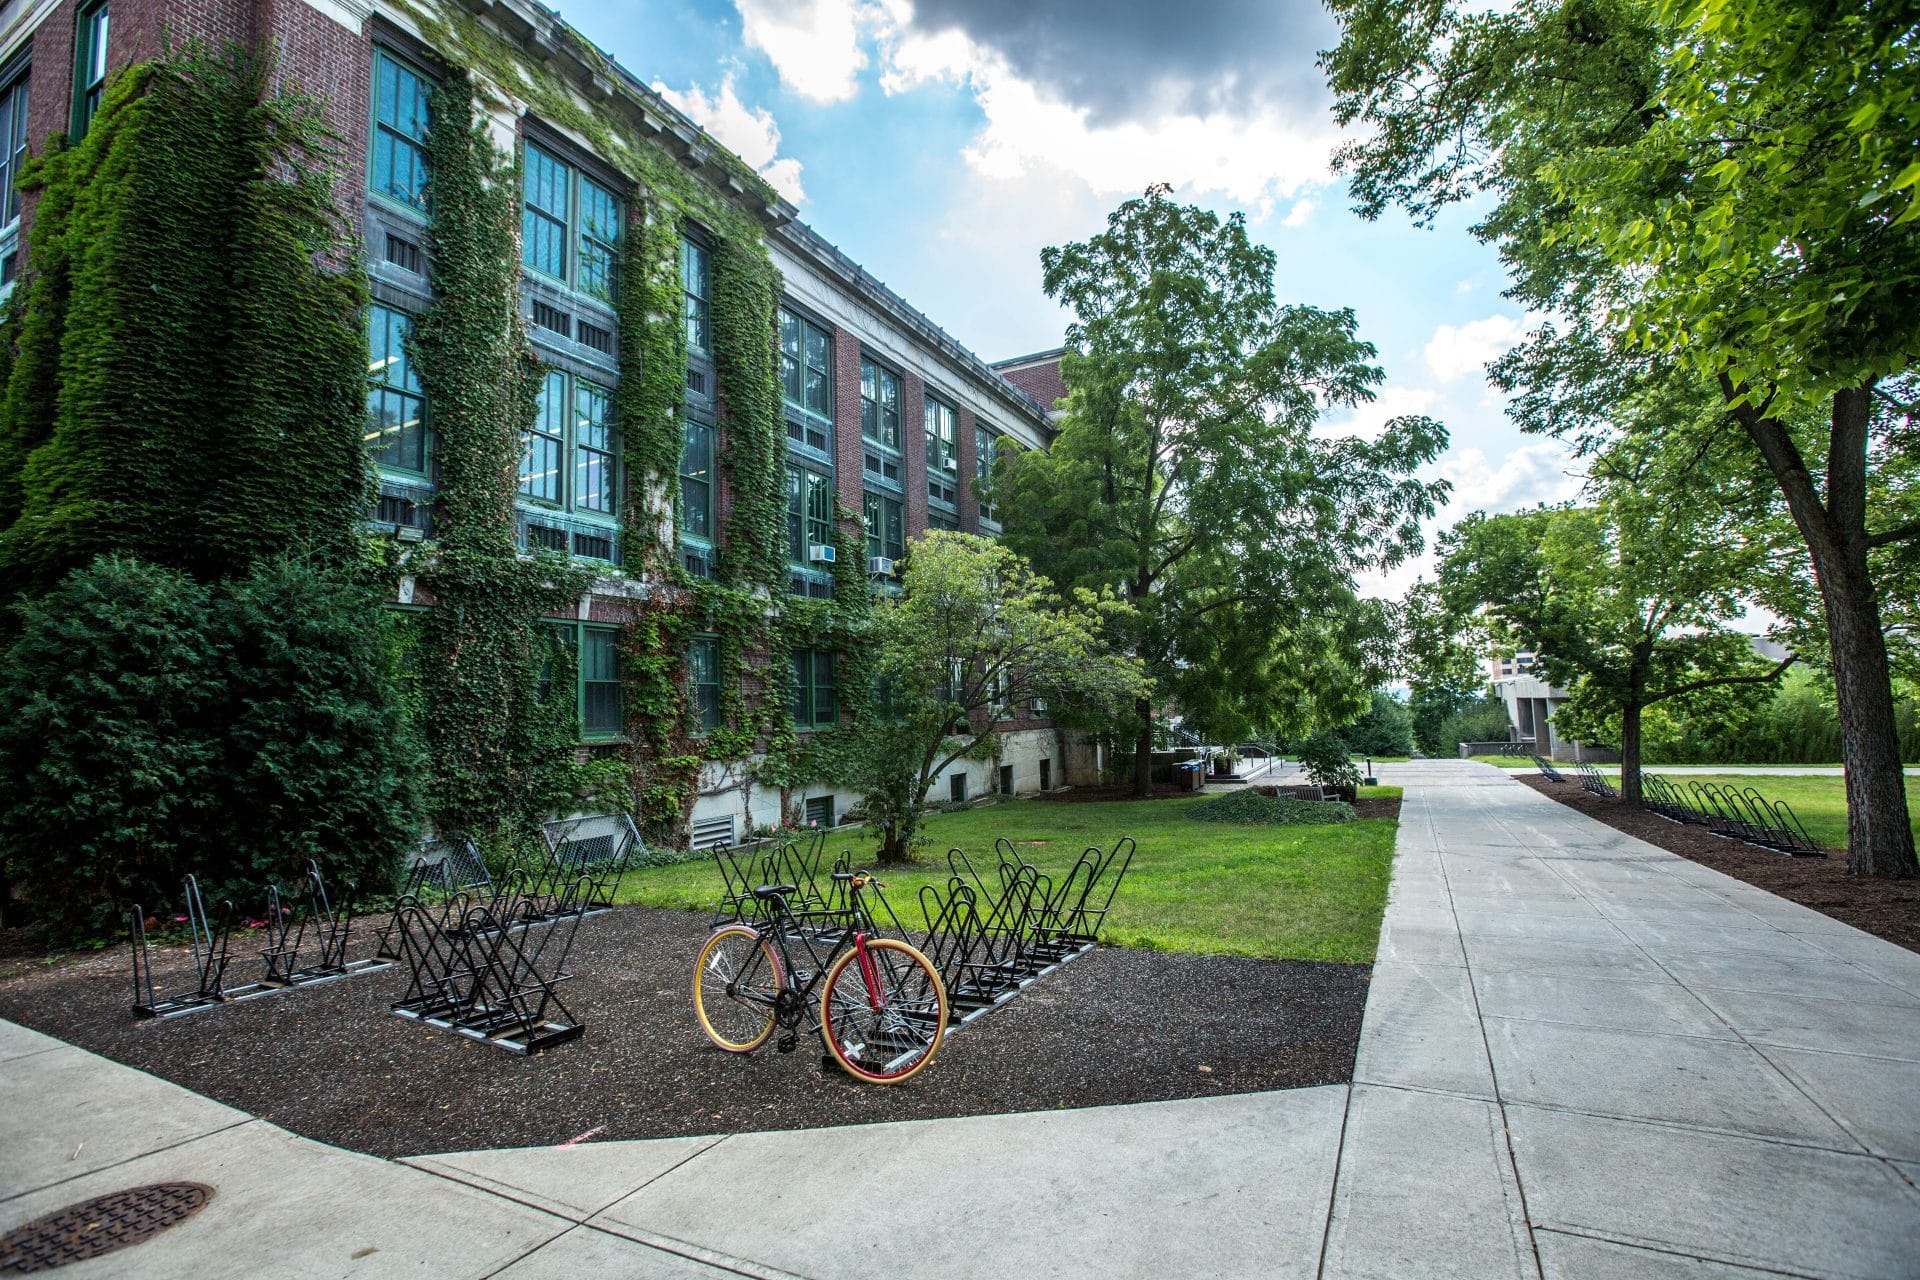 Exterior of a school with vines growing up the bricks, bike racks are on the lawn